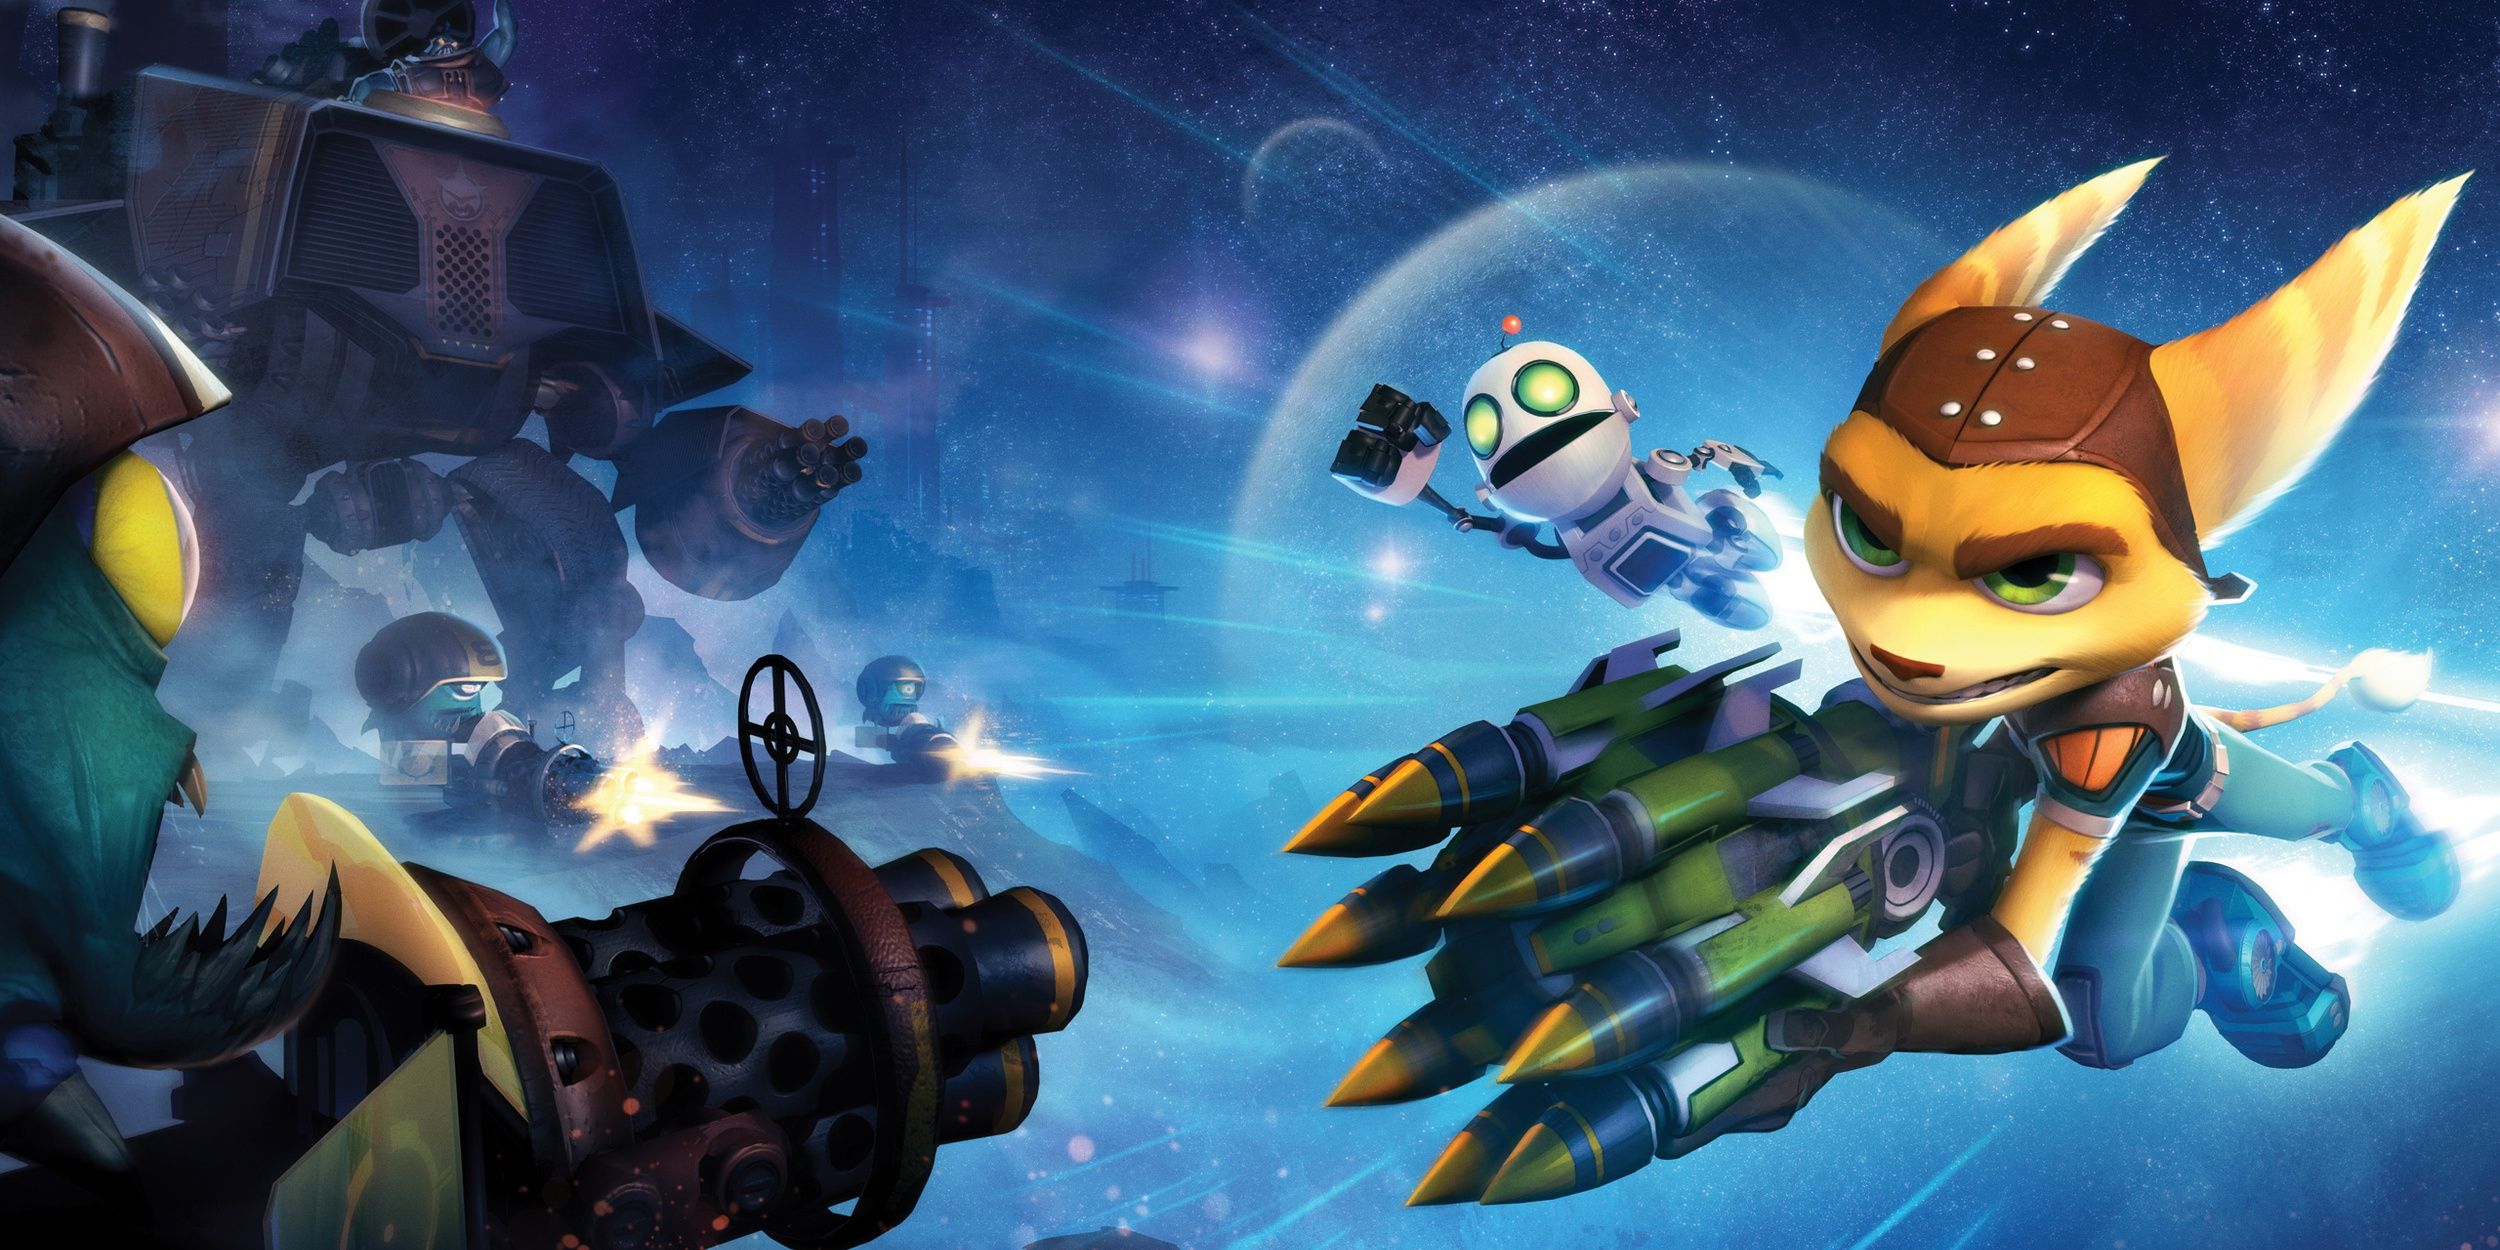 Ratchet and Clank charge toward a group of enemies